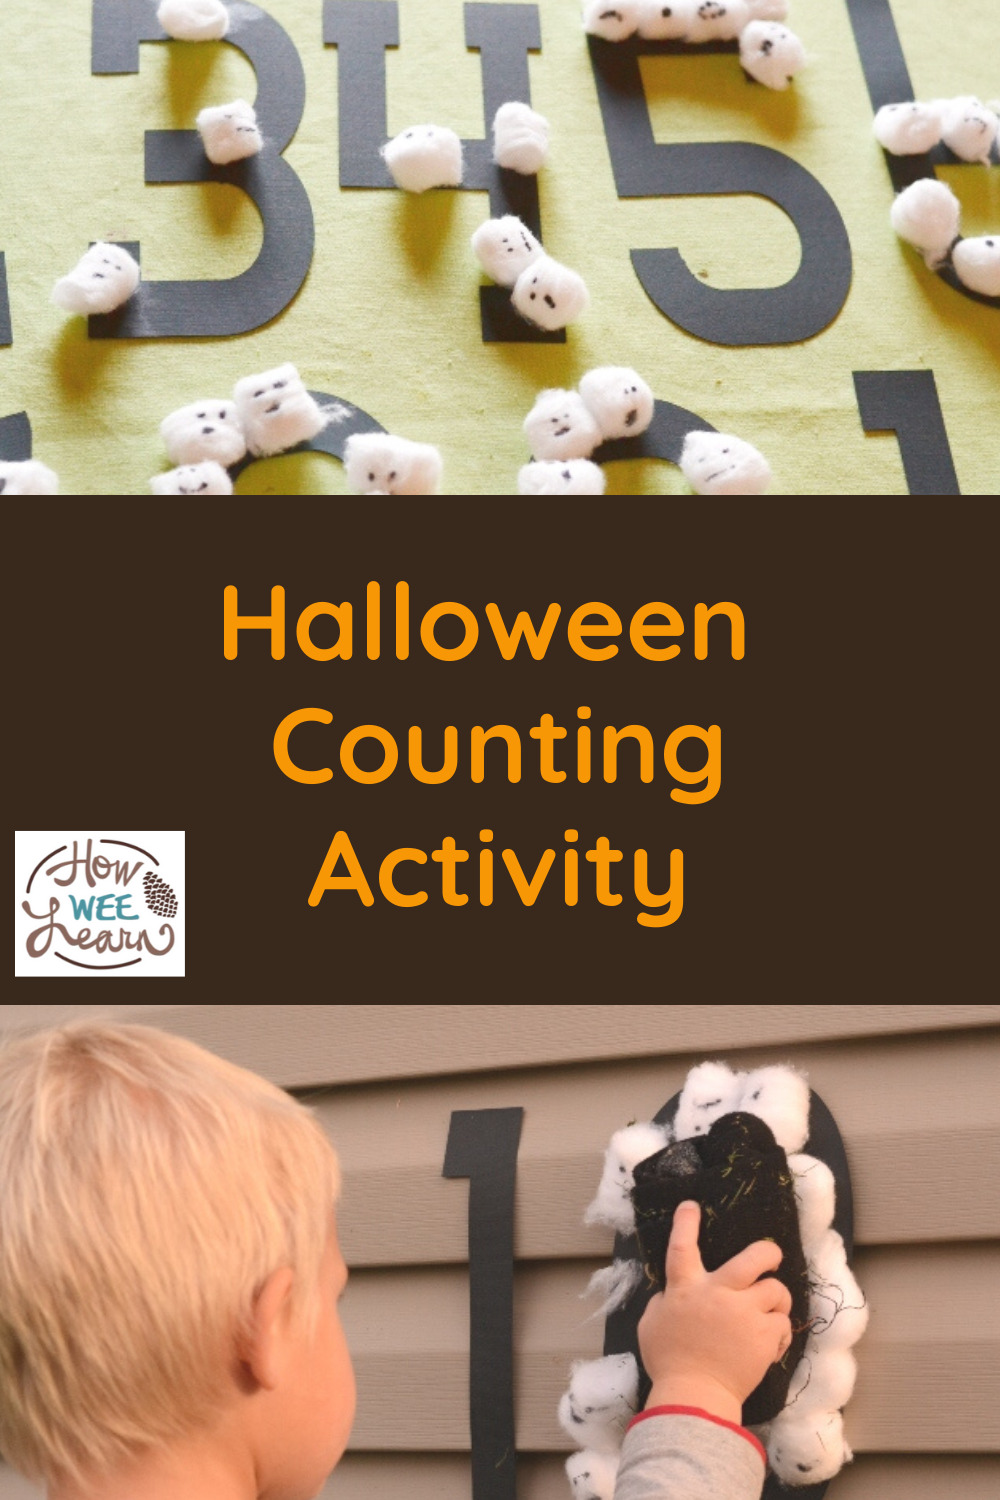 This Halloween counting activity is such a fun learning activity, kids won't even realize they are learning how to count!